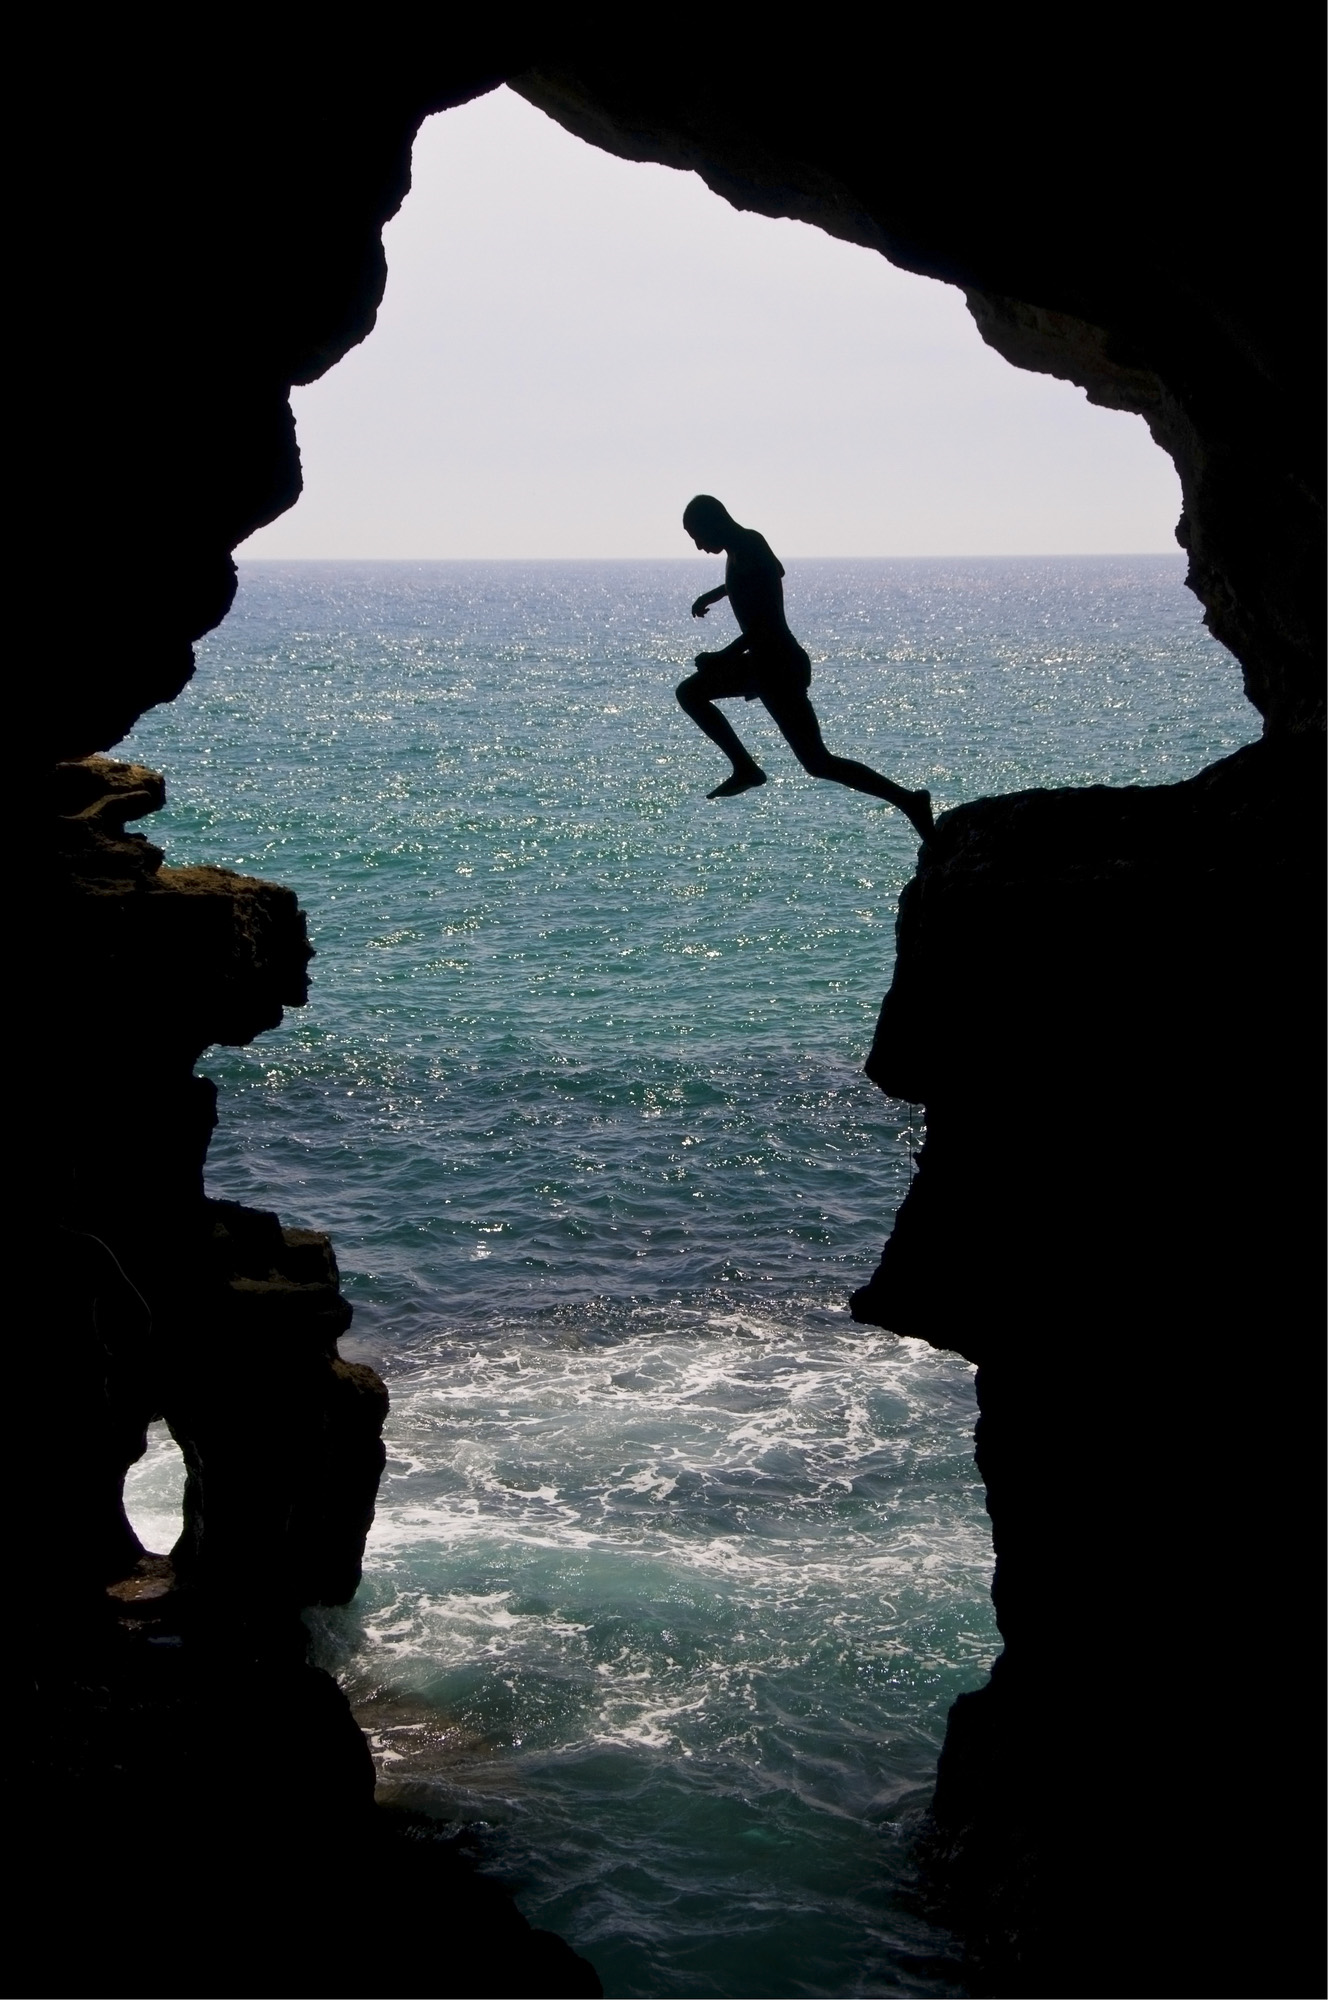 Moroccan man jumps into the ocean in the Hercules Cave near Tangier, Morocco.